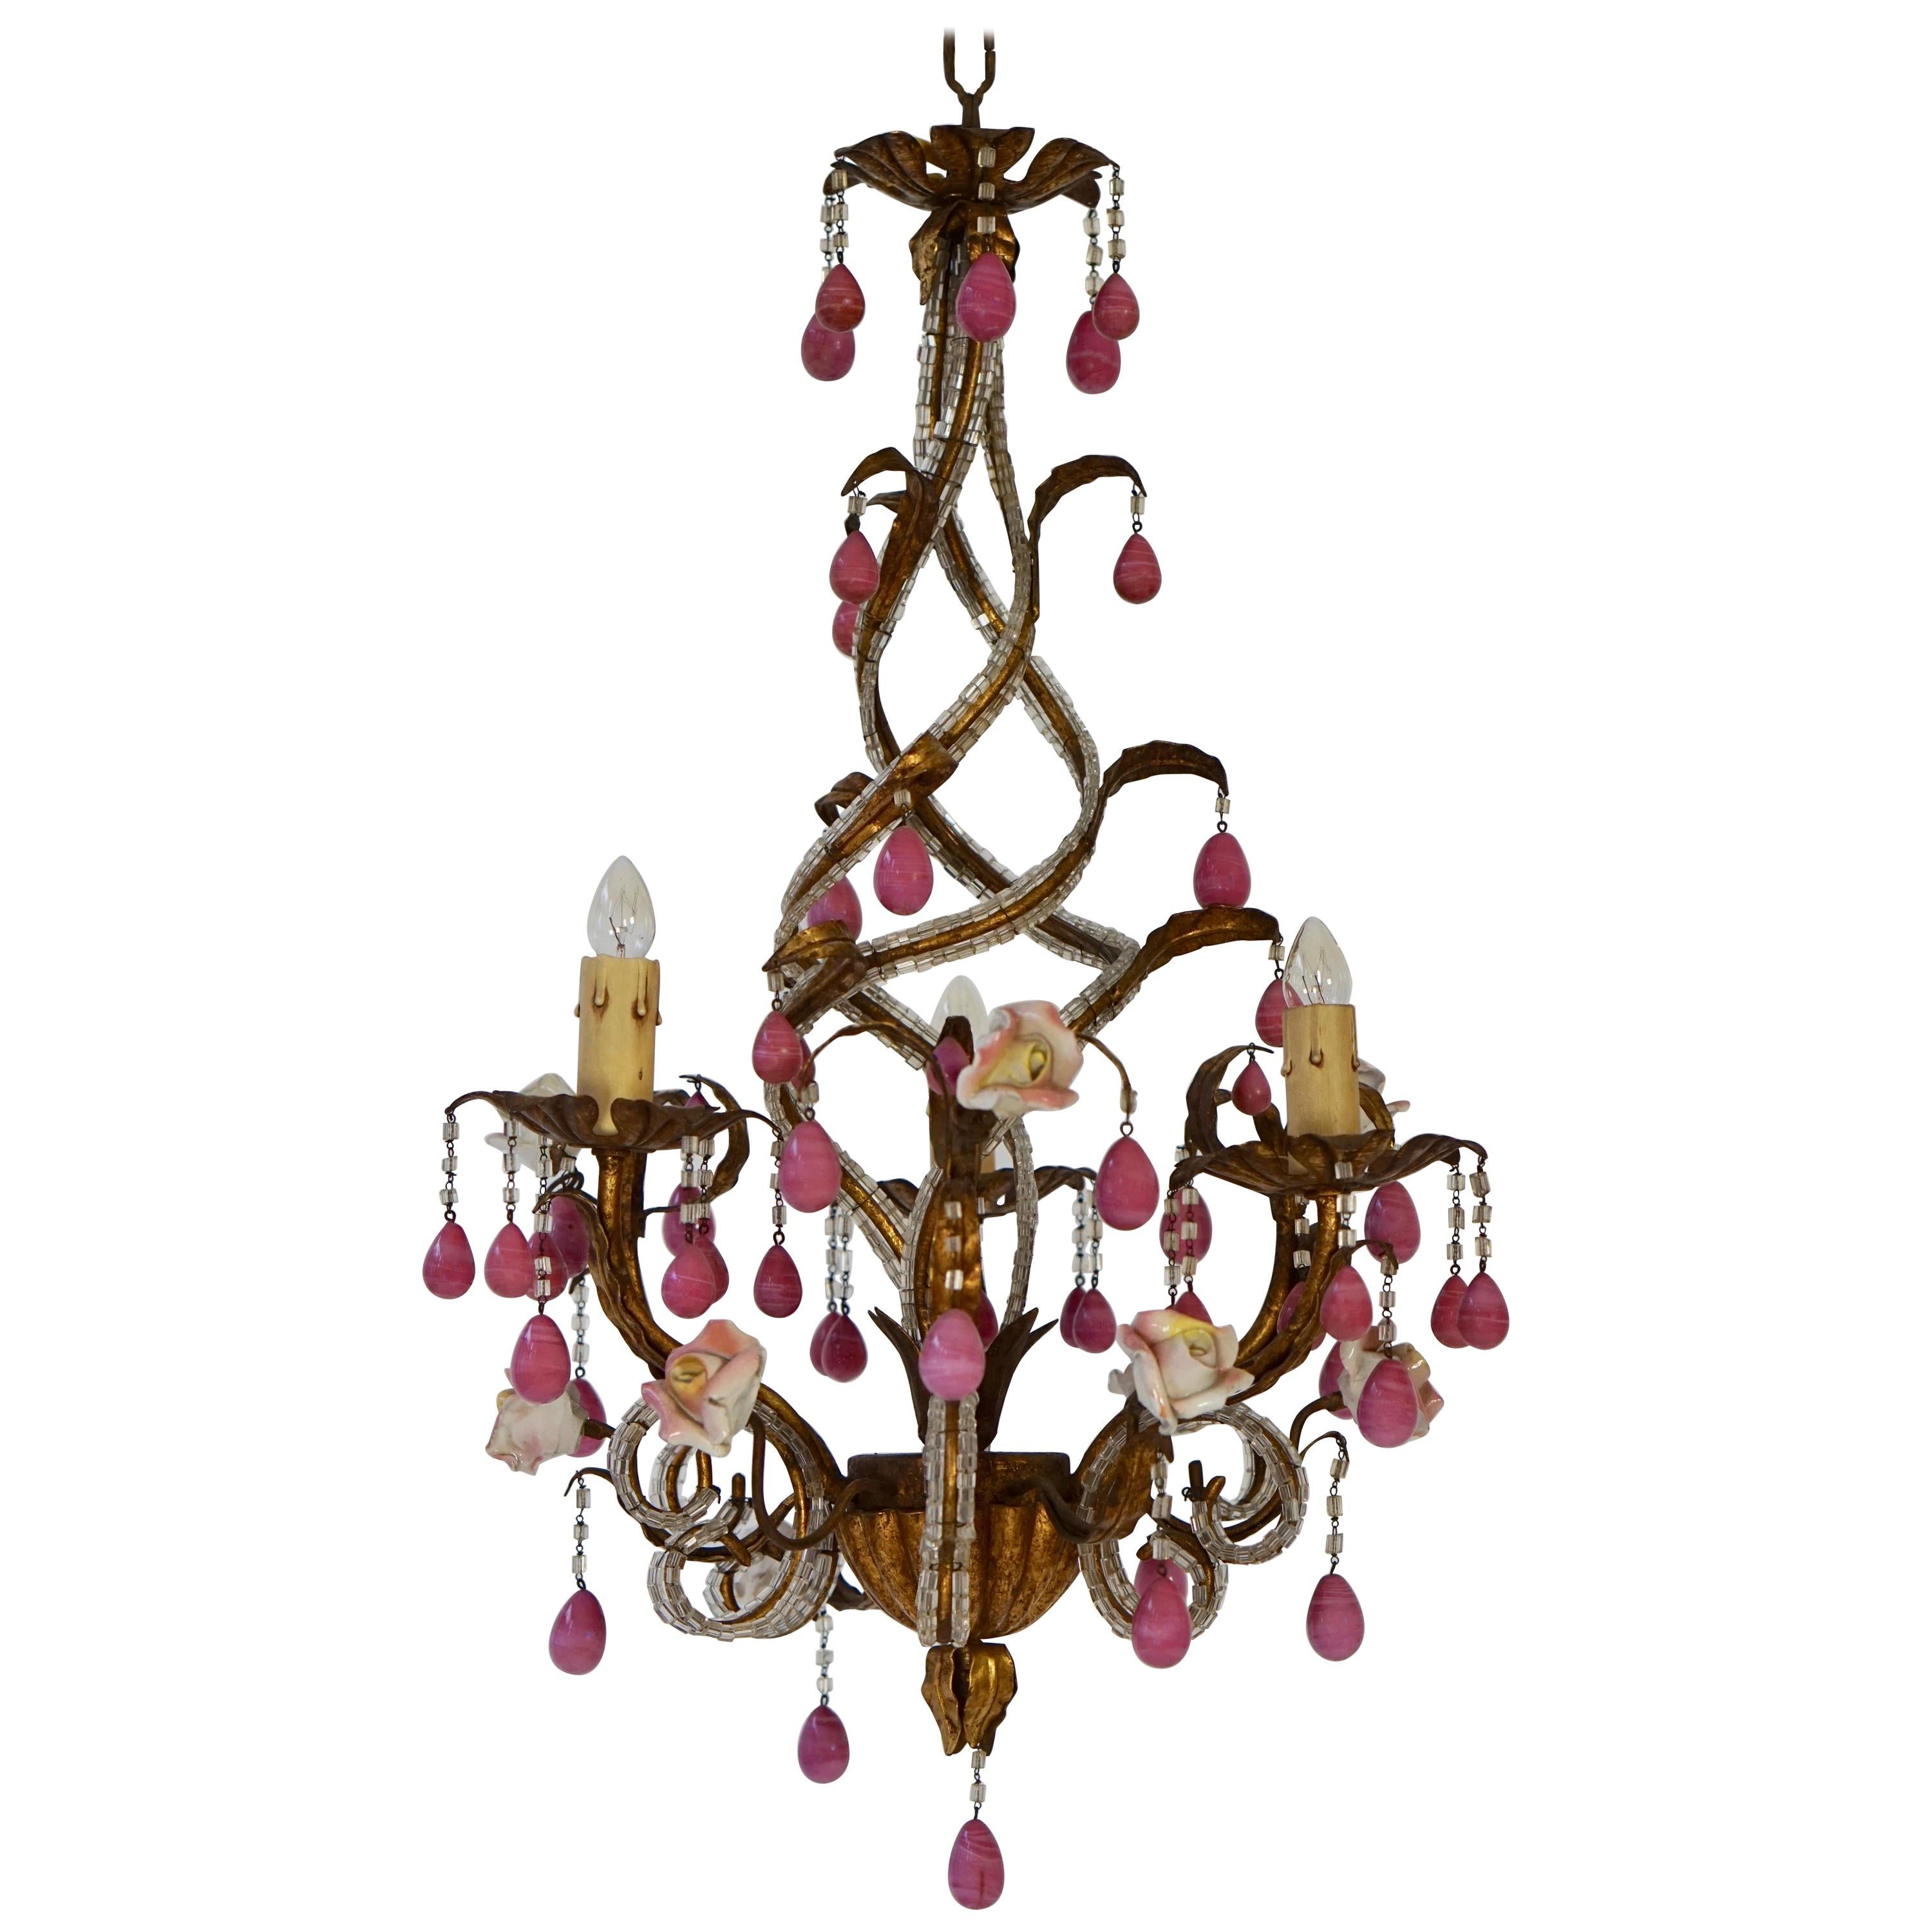 Brass and Ceramic Drop Chandelier with Porcelain Flowers, Italy